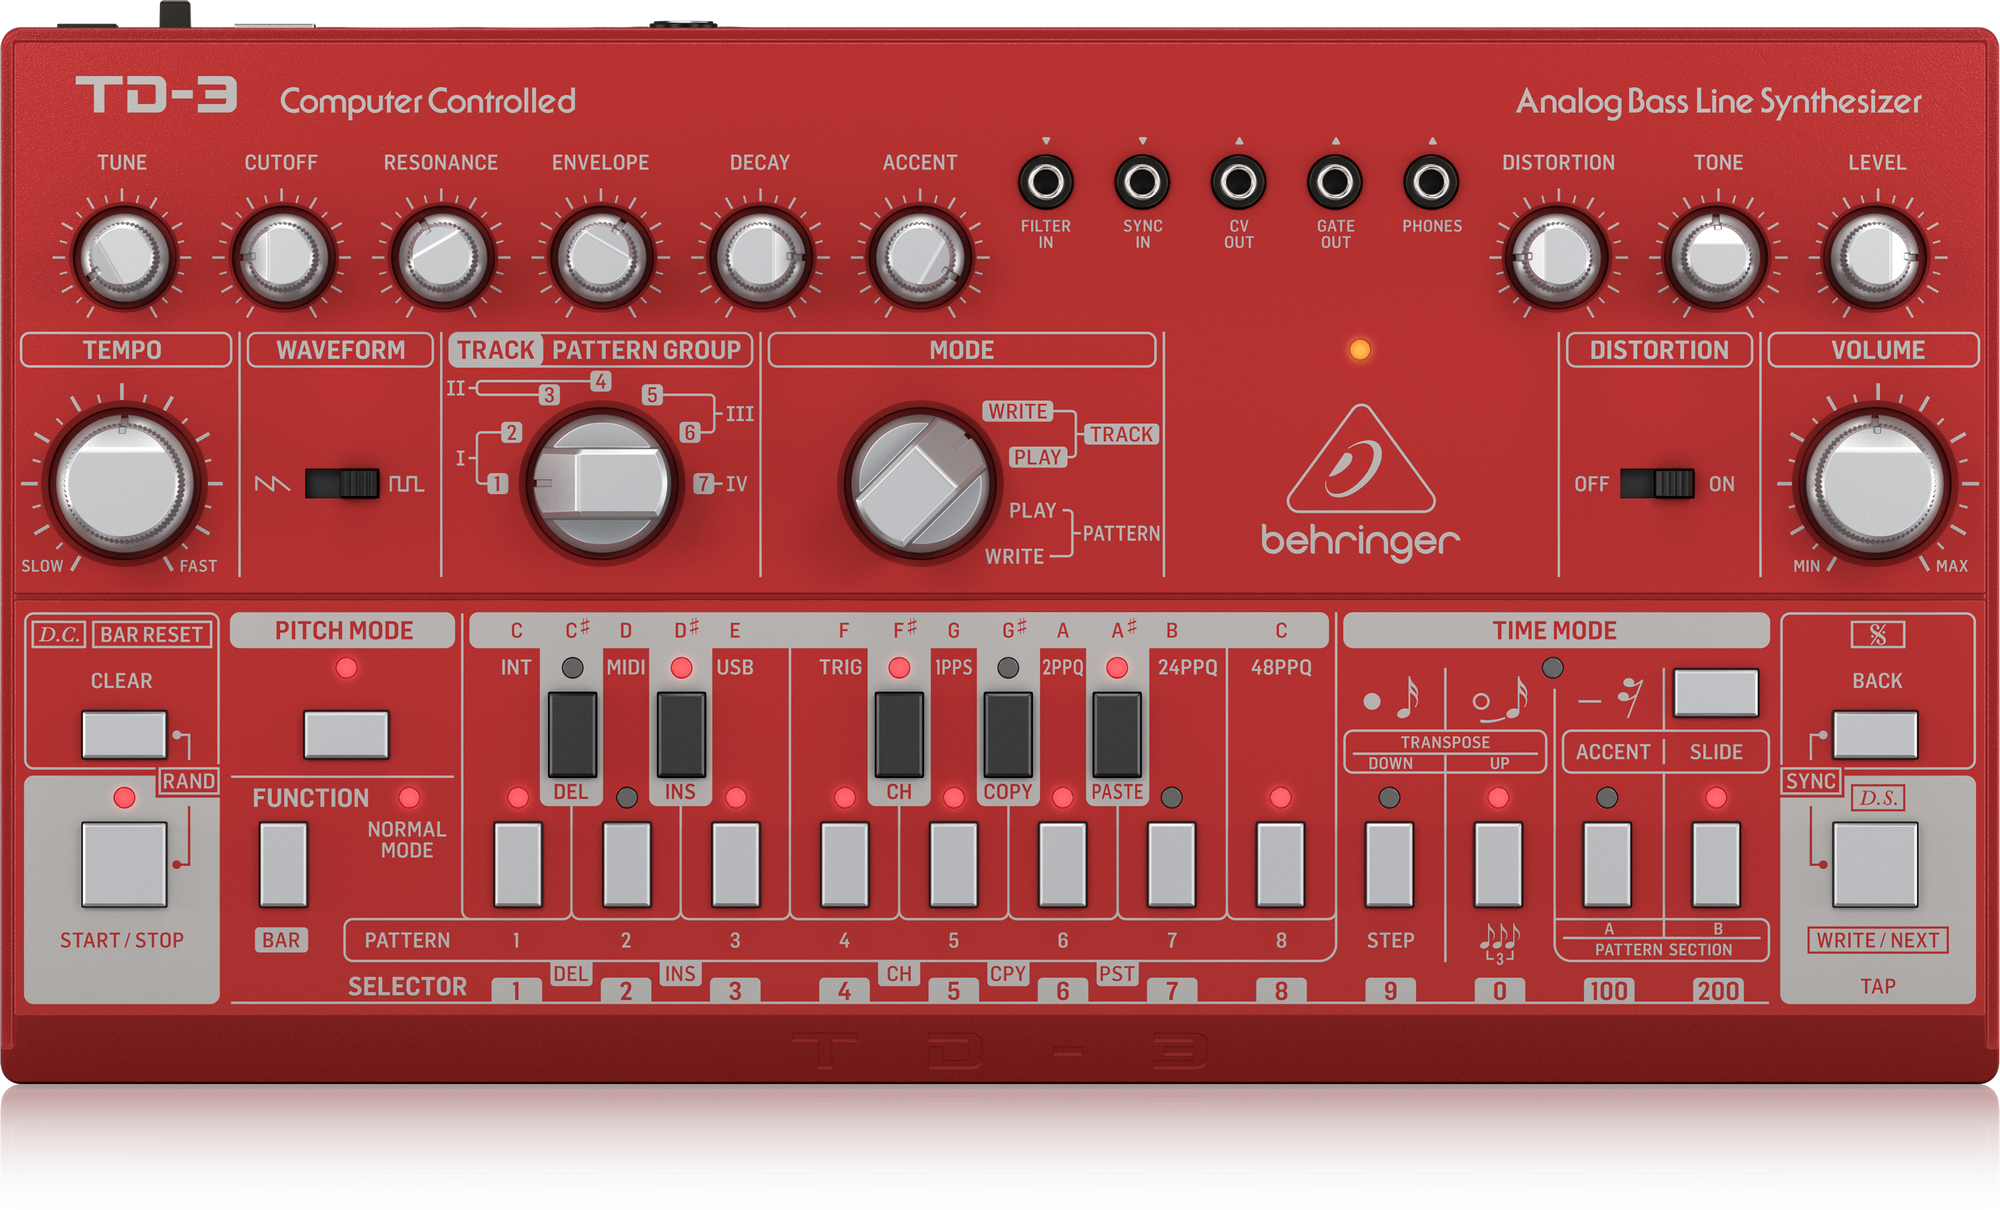 TD3RD Analog Bass Line Synthesizer